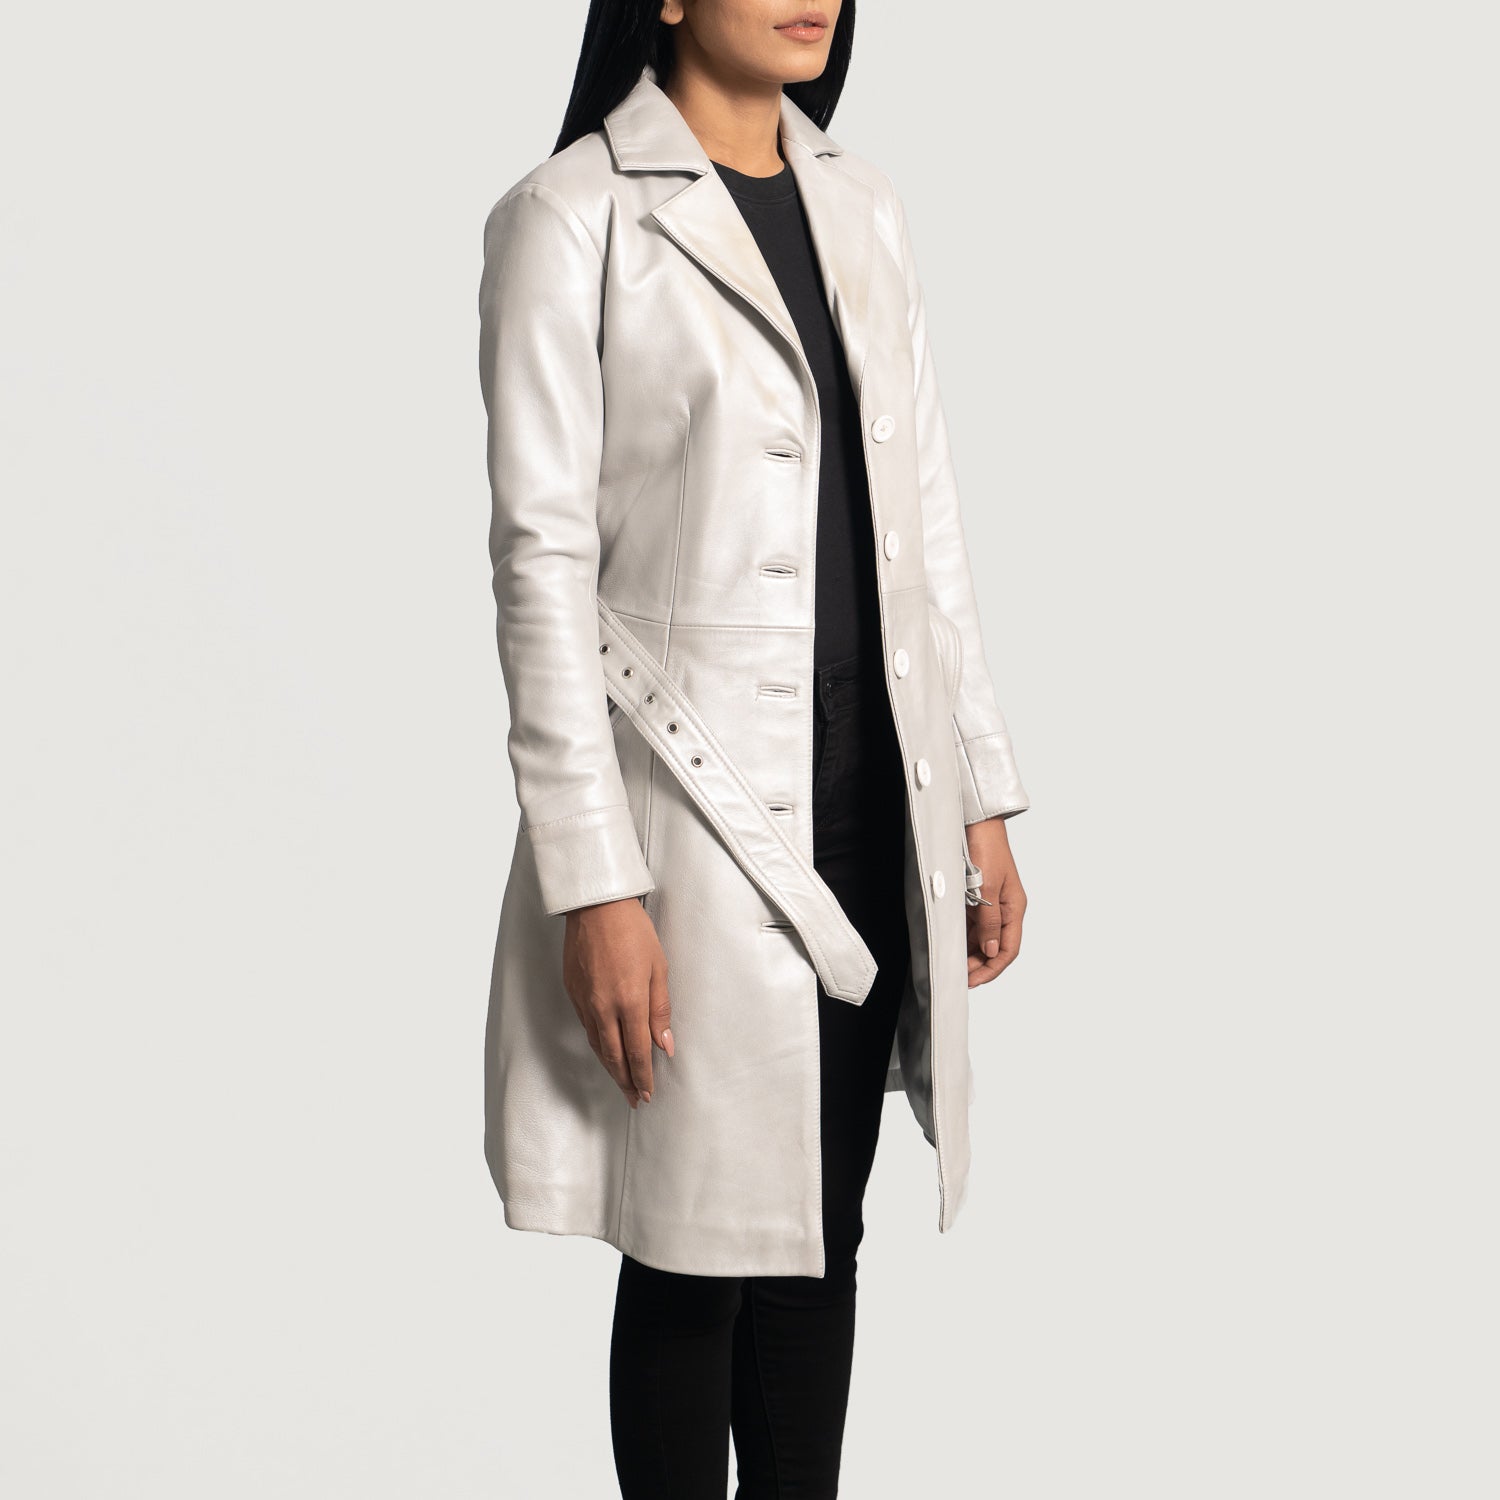 Womens Silver White Leather Trench Coat Full Length - Leather CoatWomen's Silver White Leather Trench Coat Full Length, Full Length Silver White Leather Coat for Women, Women's Leather Trench Coat, Stylish Women's Leather Trench Coat, Premium Quality Women's Leather Coat, Elegant Women's Leather Outerwear,